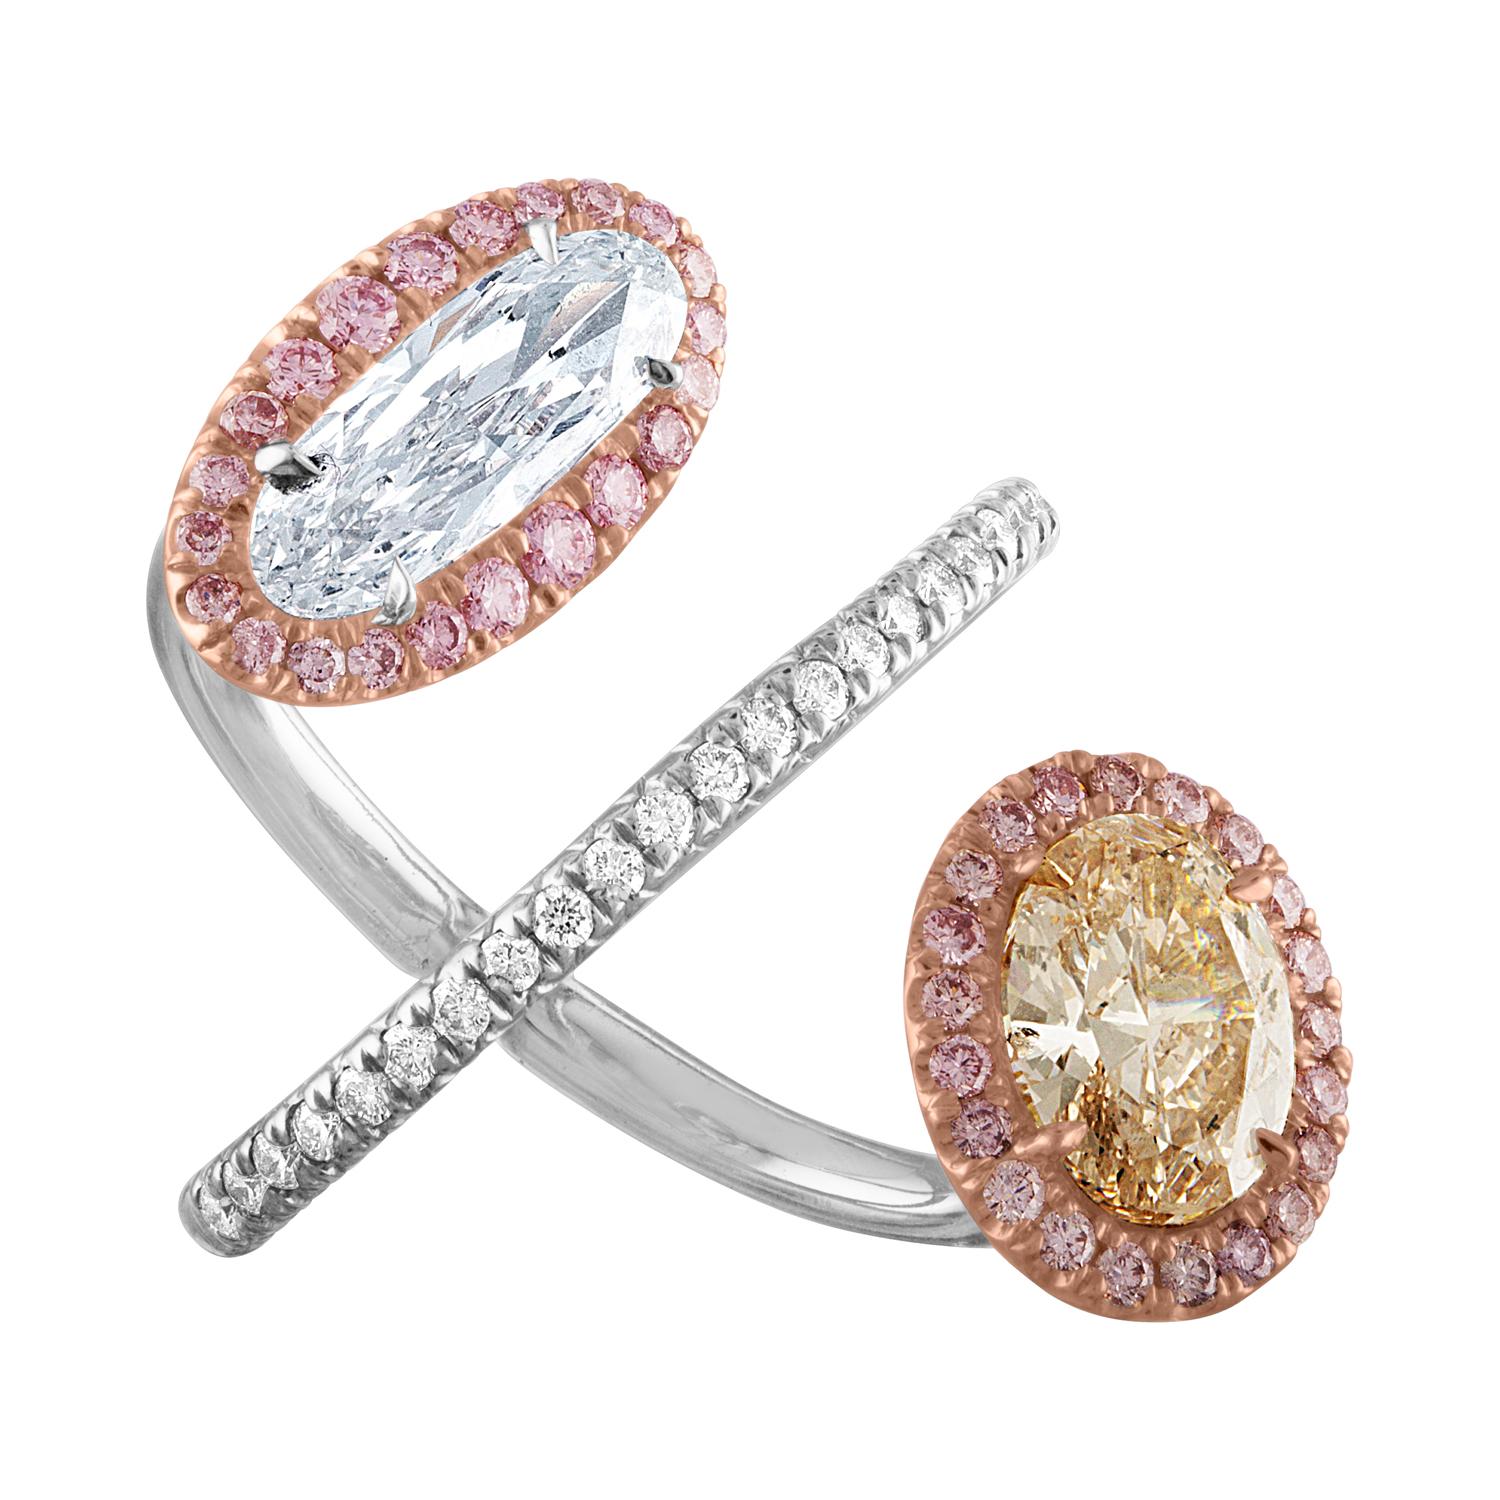 Women's GIA Certified White Oval Diamond and GIA Certified Brown-Pink Diamond Ring